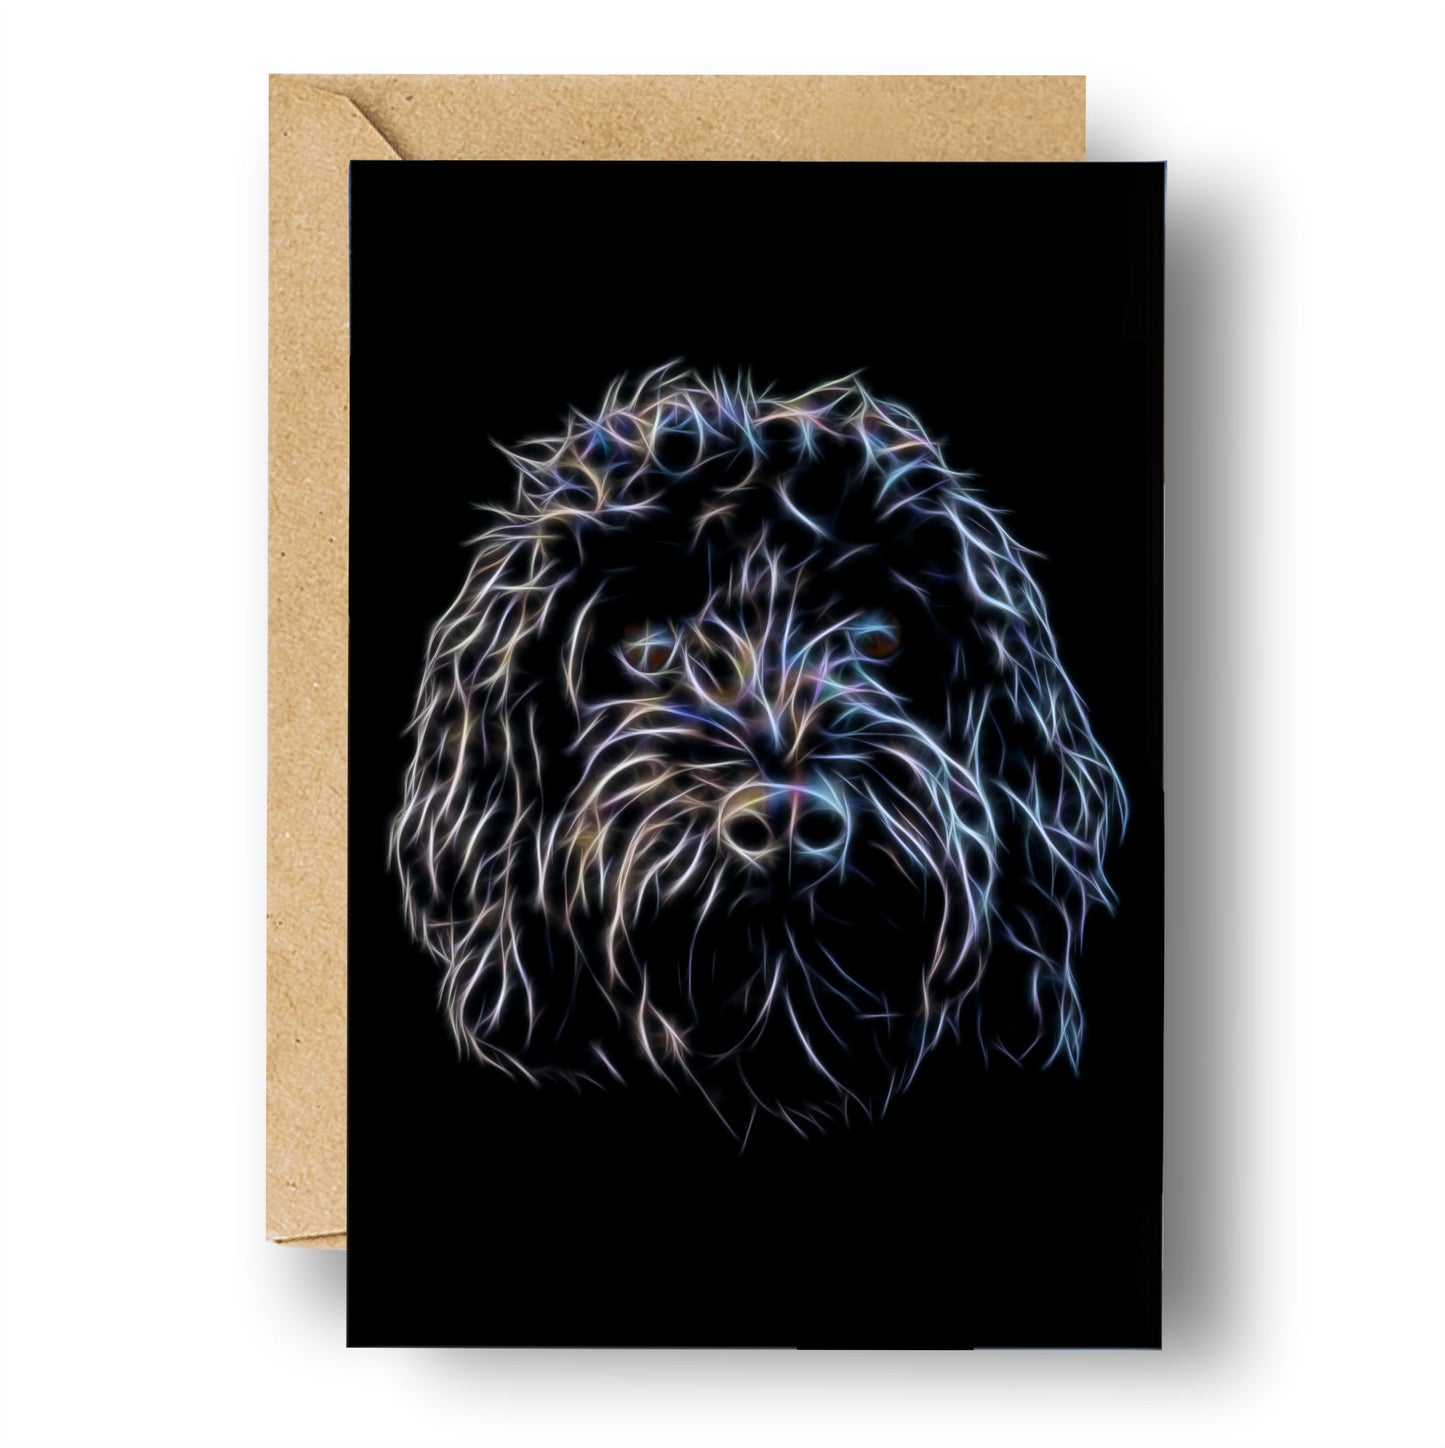 Black Cockapoo Greeting Card Blank Inside for Birthdays or any other Occasion